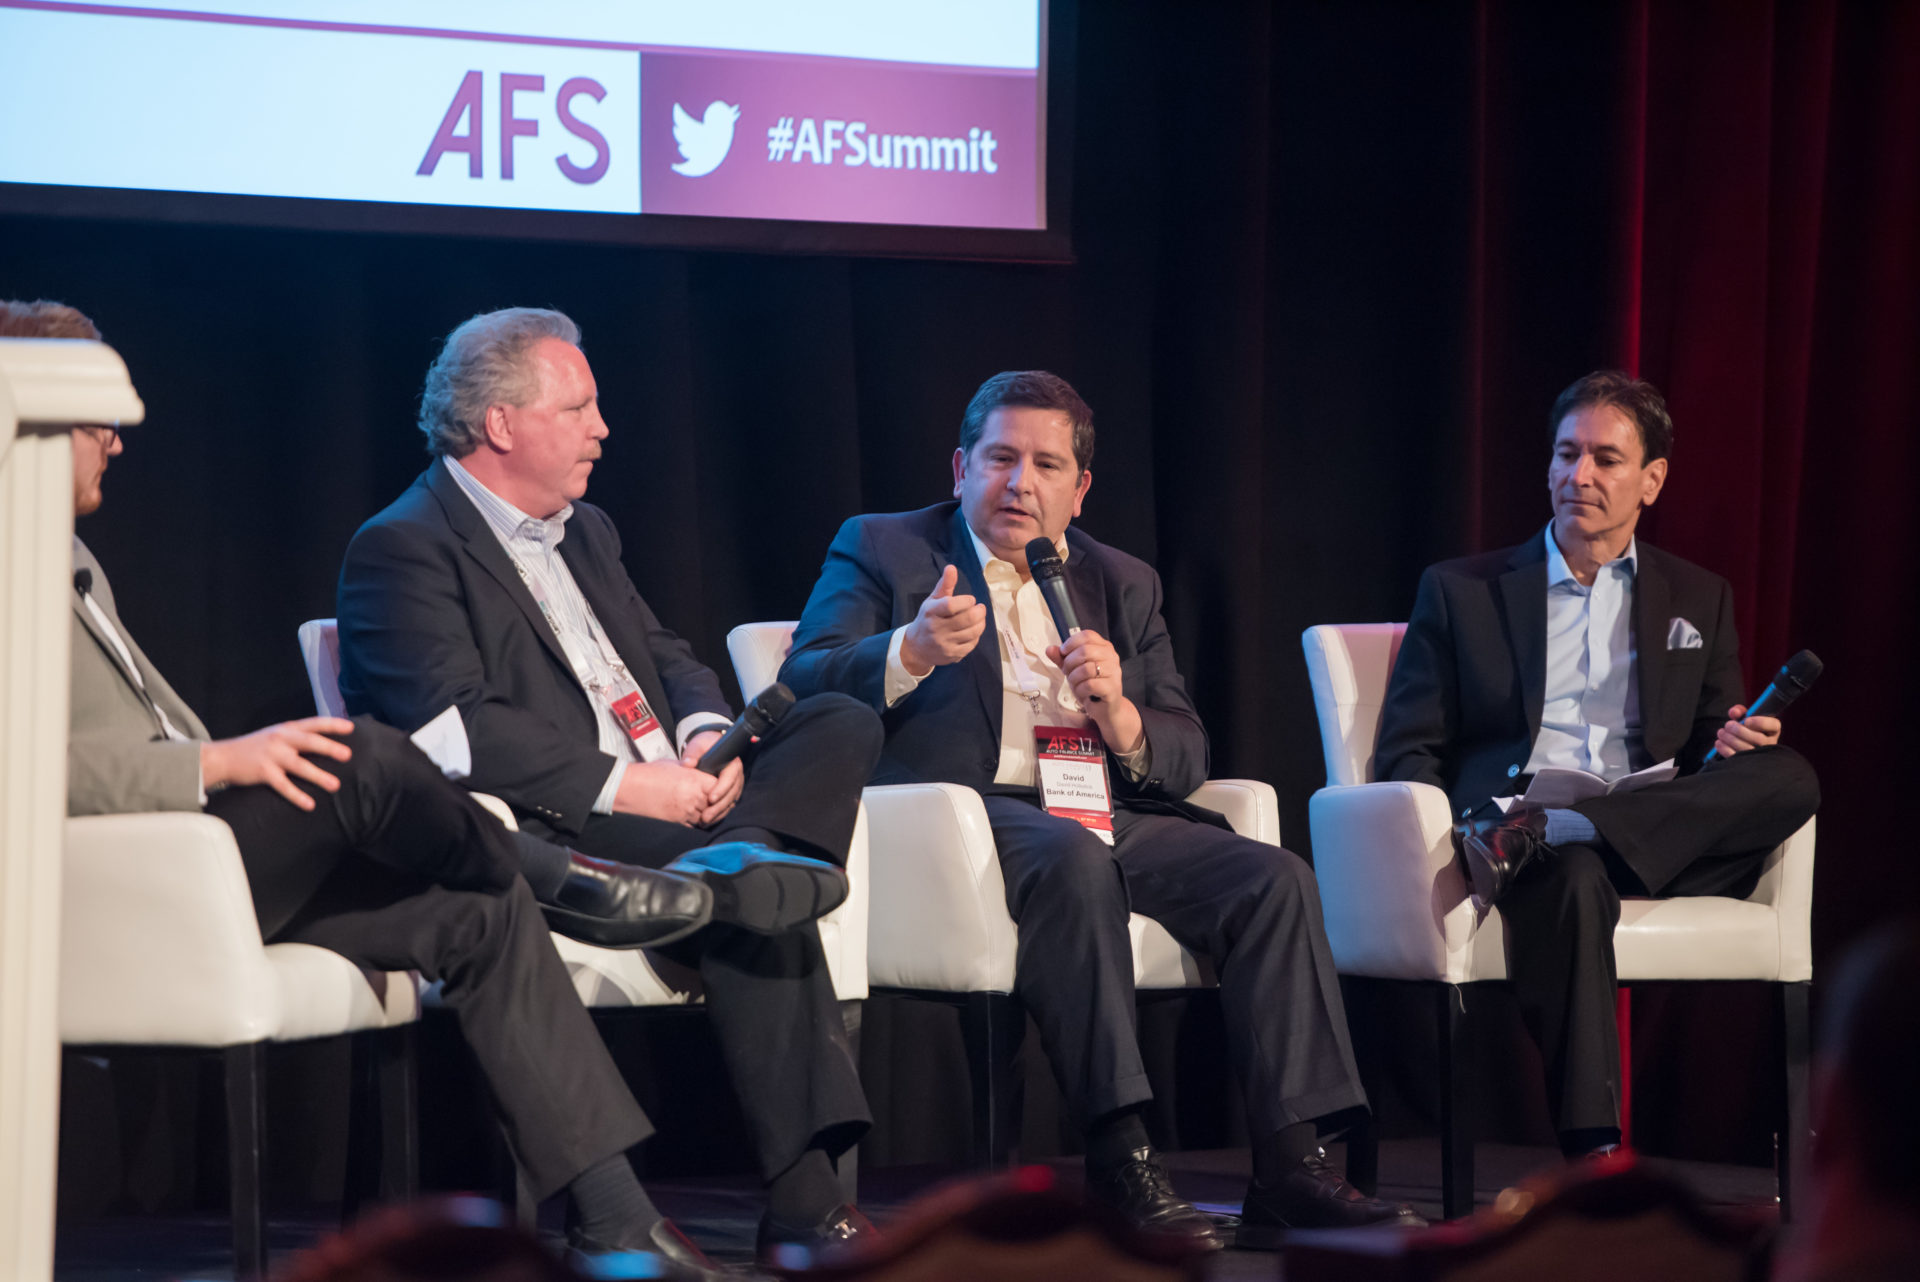 From left, Jeff Danford, SVP of Auto Finance at Ally Financial; David Hollodick, SVP, Product and Pricing Executive Consumer Vehicle Lending at Bank of America; and
Chas Roscow, Director, Vehicle Lending at State Farm Bank, discuss direct lending trends in a panel discussion at the 2017 Auto Finance Summit.